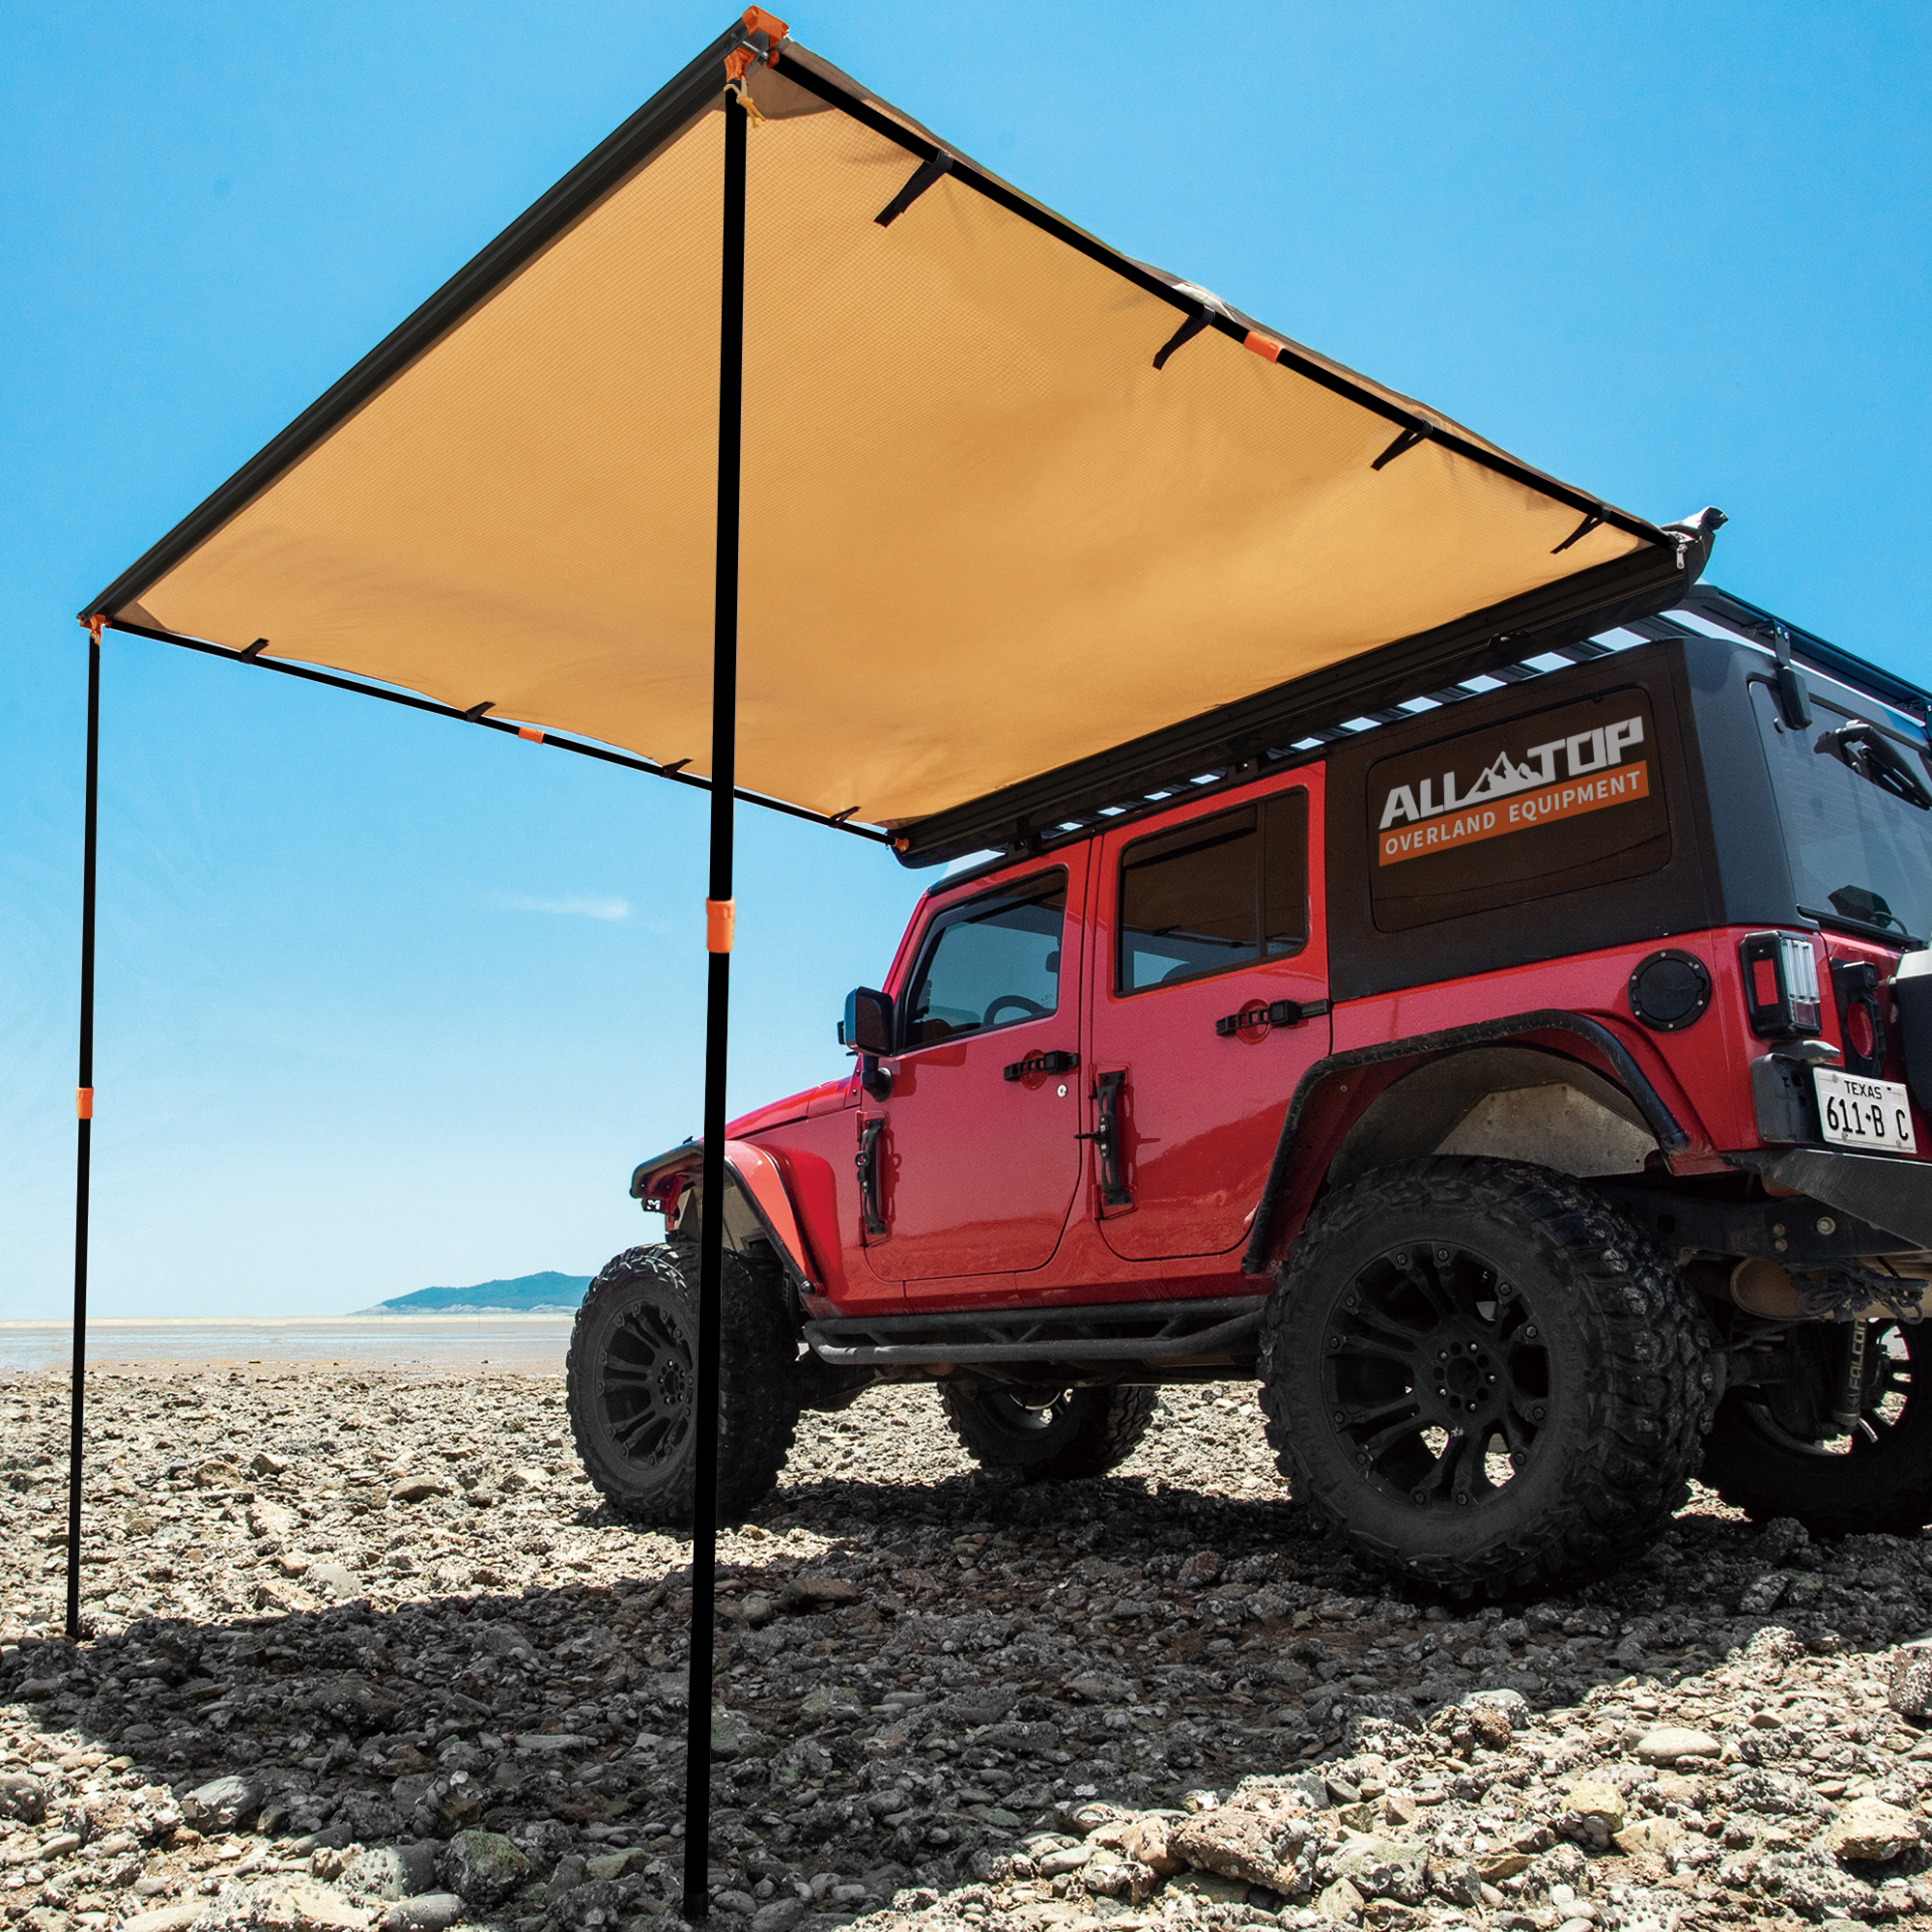 Rooftop Vehicle Awning - 6.6ft x 8.2ft